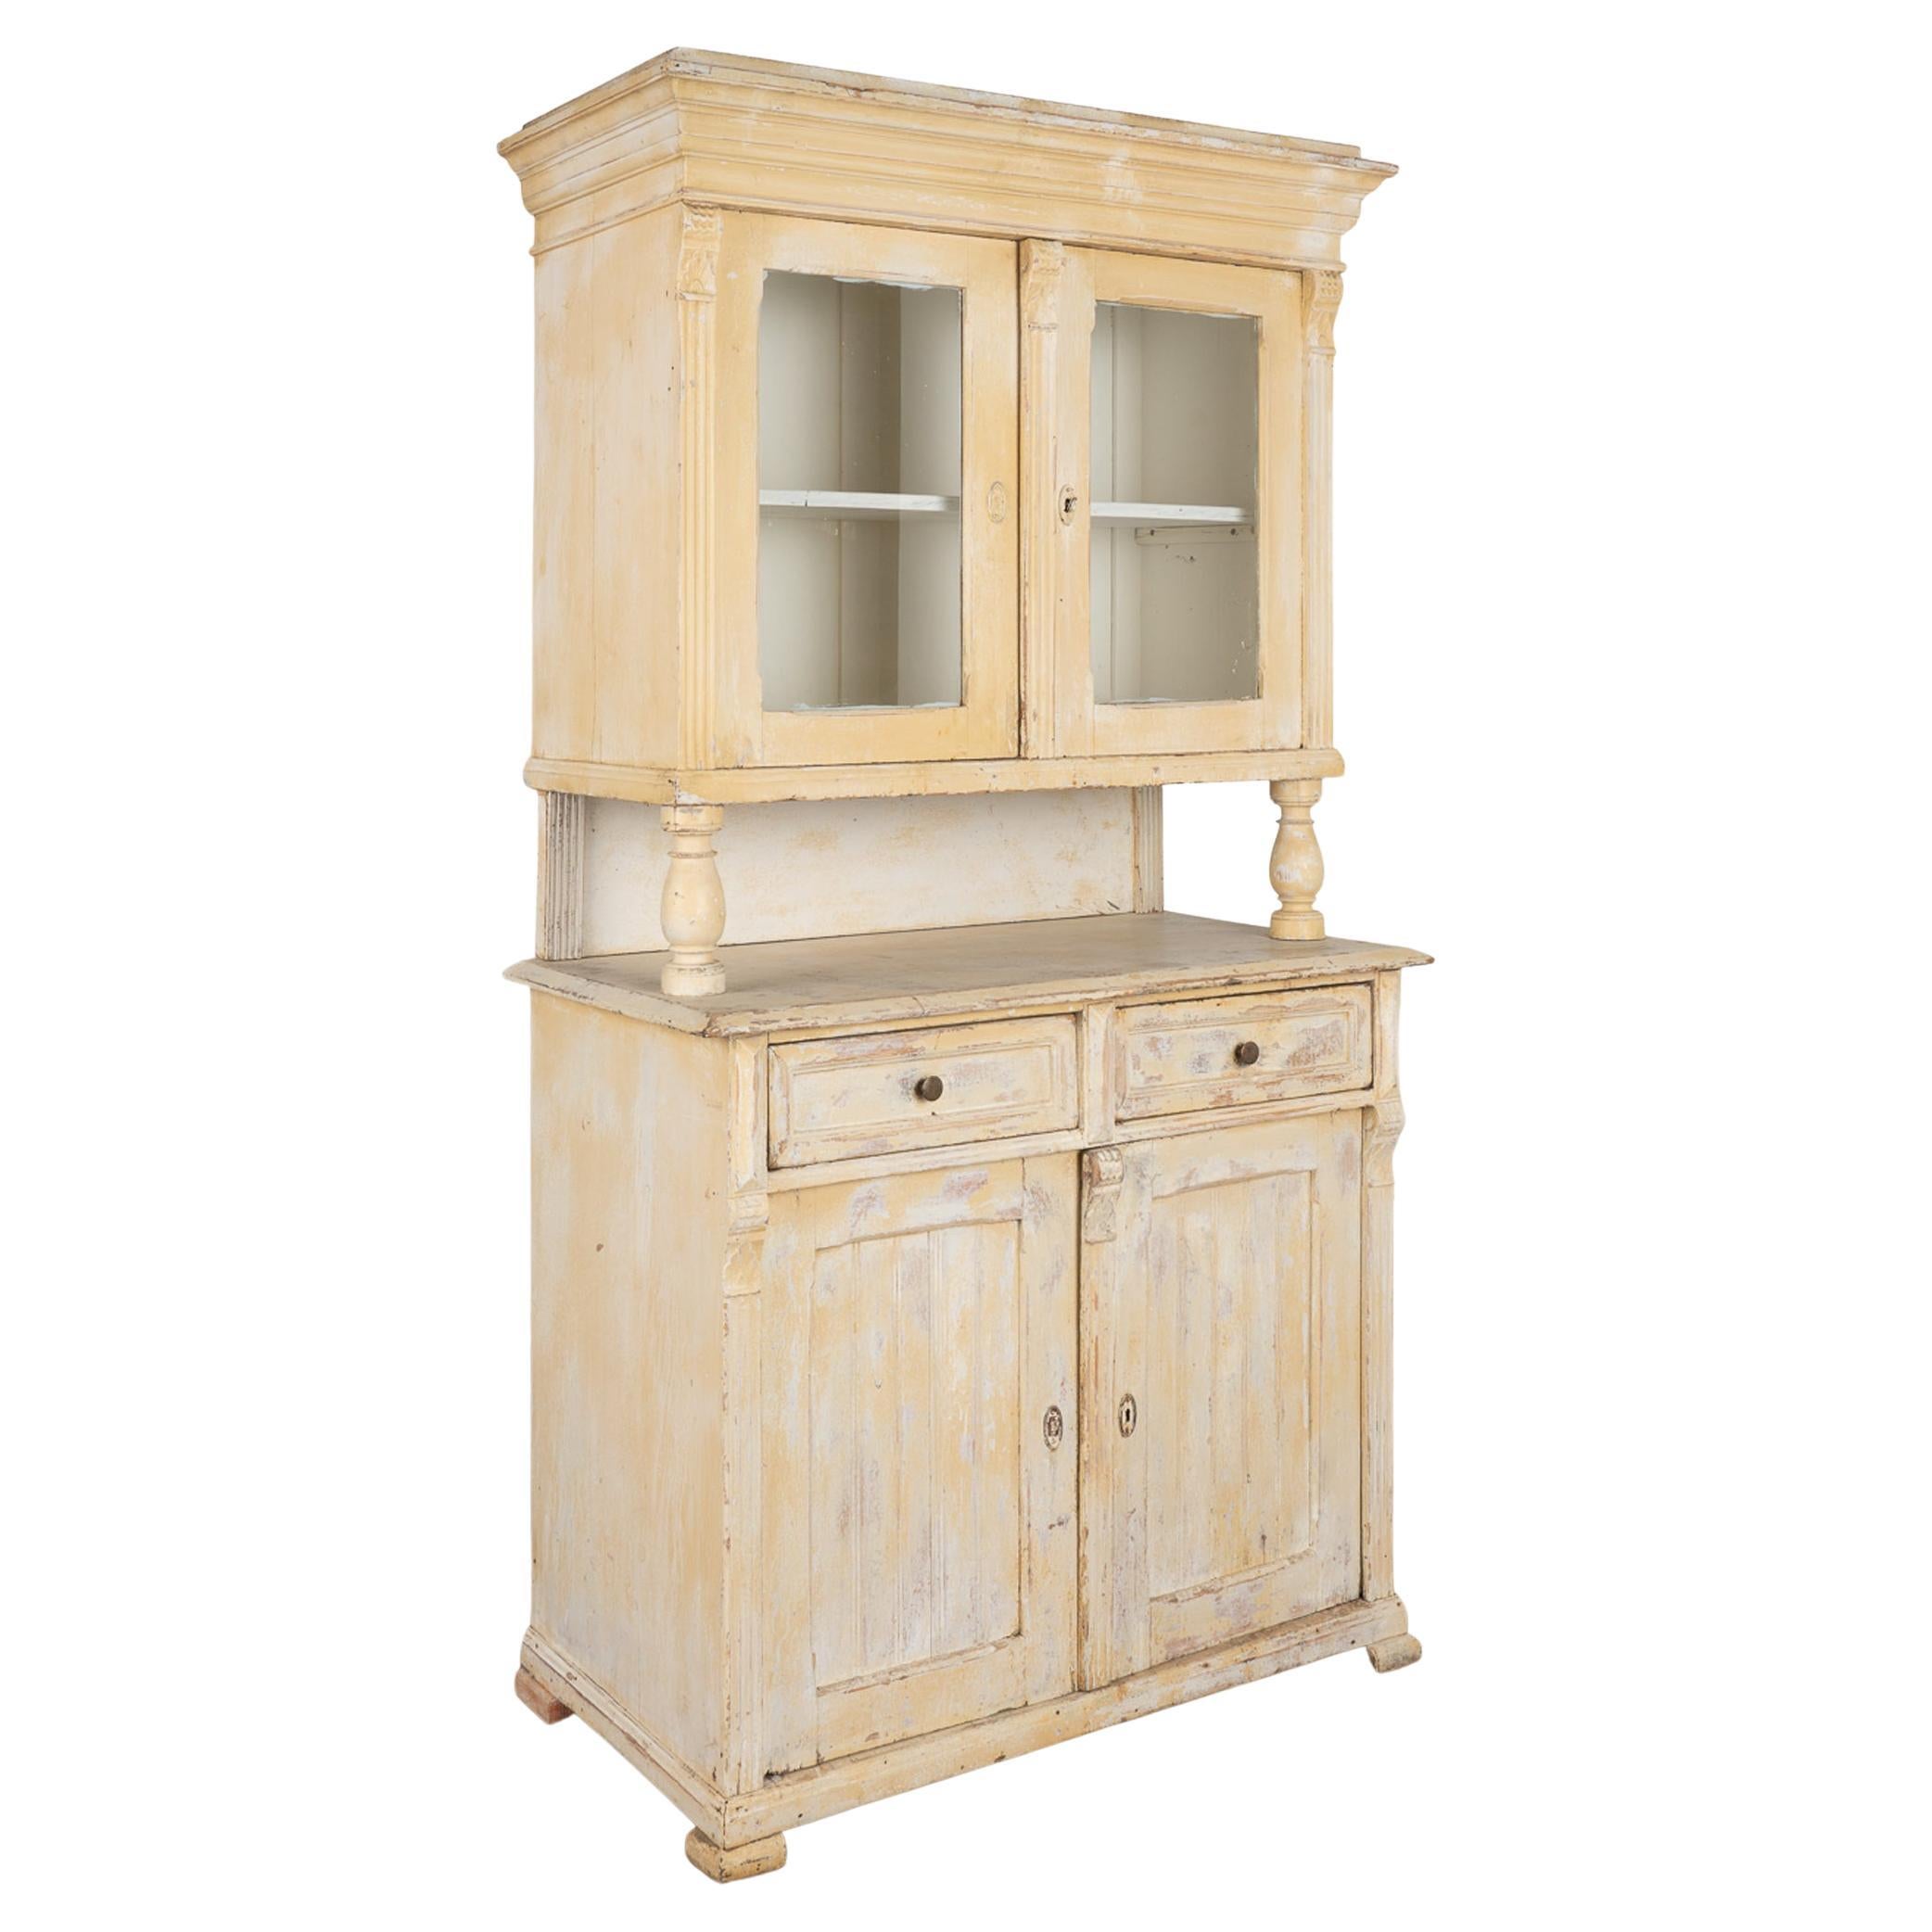 Antique Painted Pine Cupboard Cabinet, Hungary circa 1890